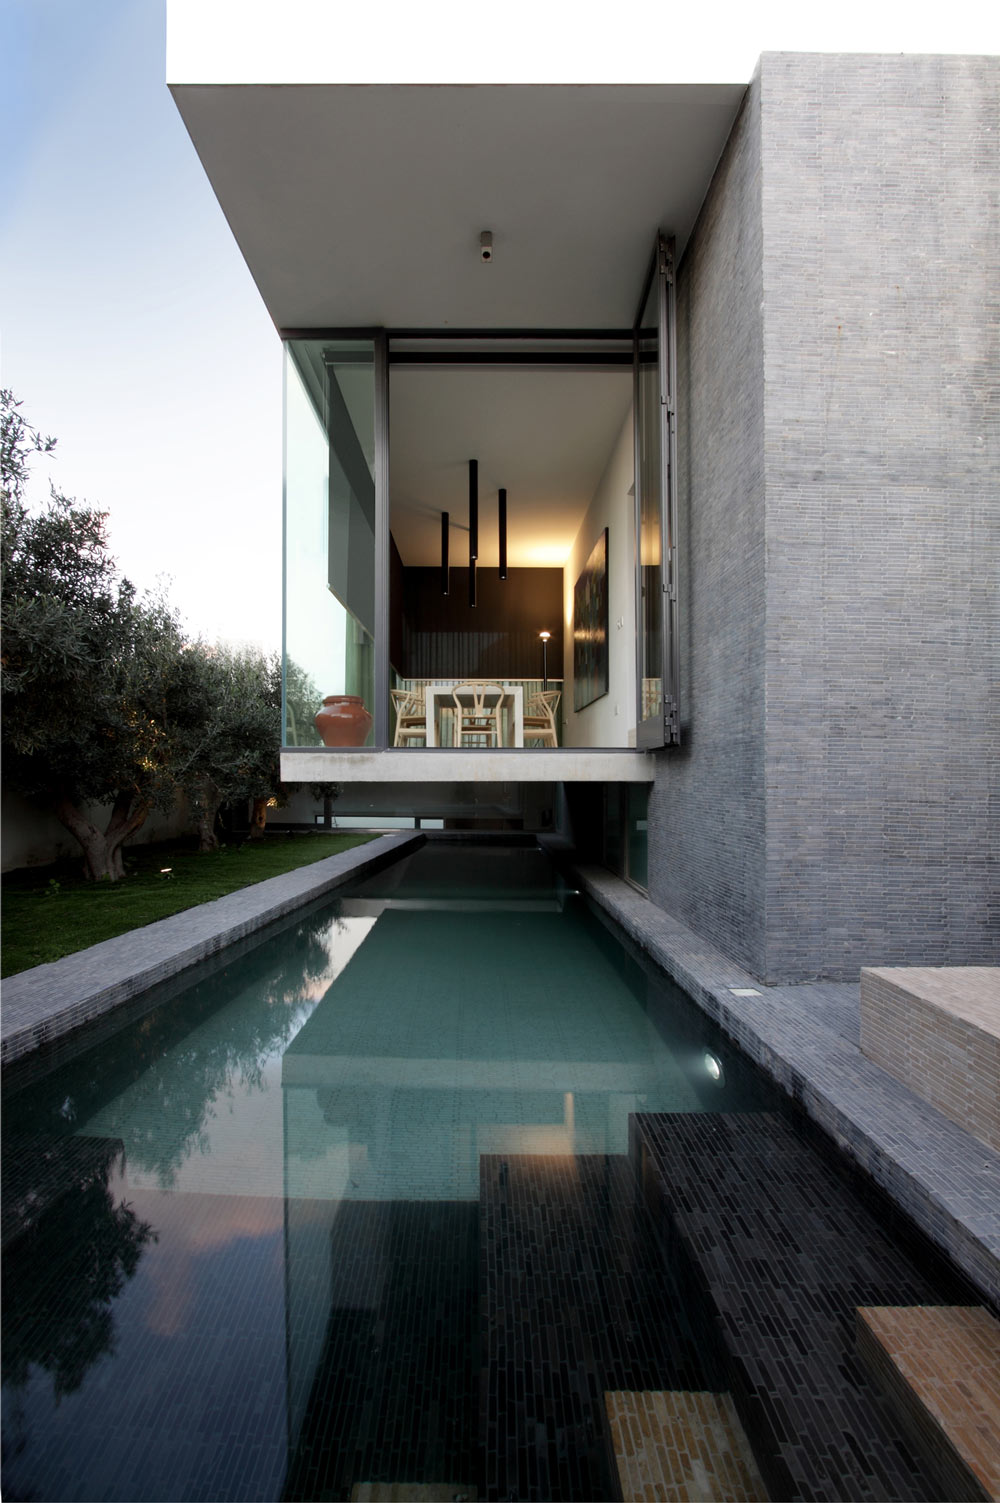 Cantilever Over Pool, Hanging Home in Naxxar, Malta by Chris Briffa Architects